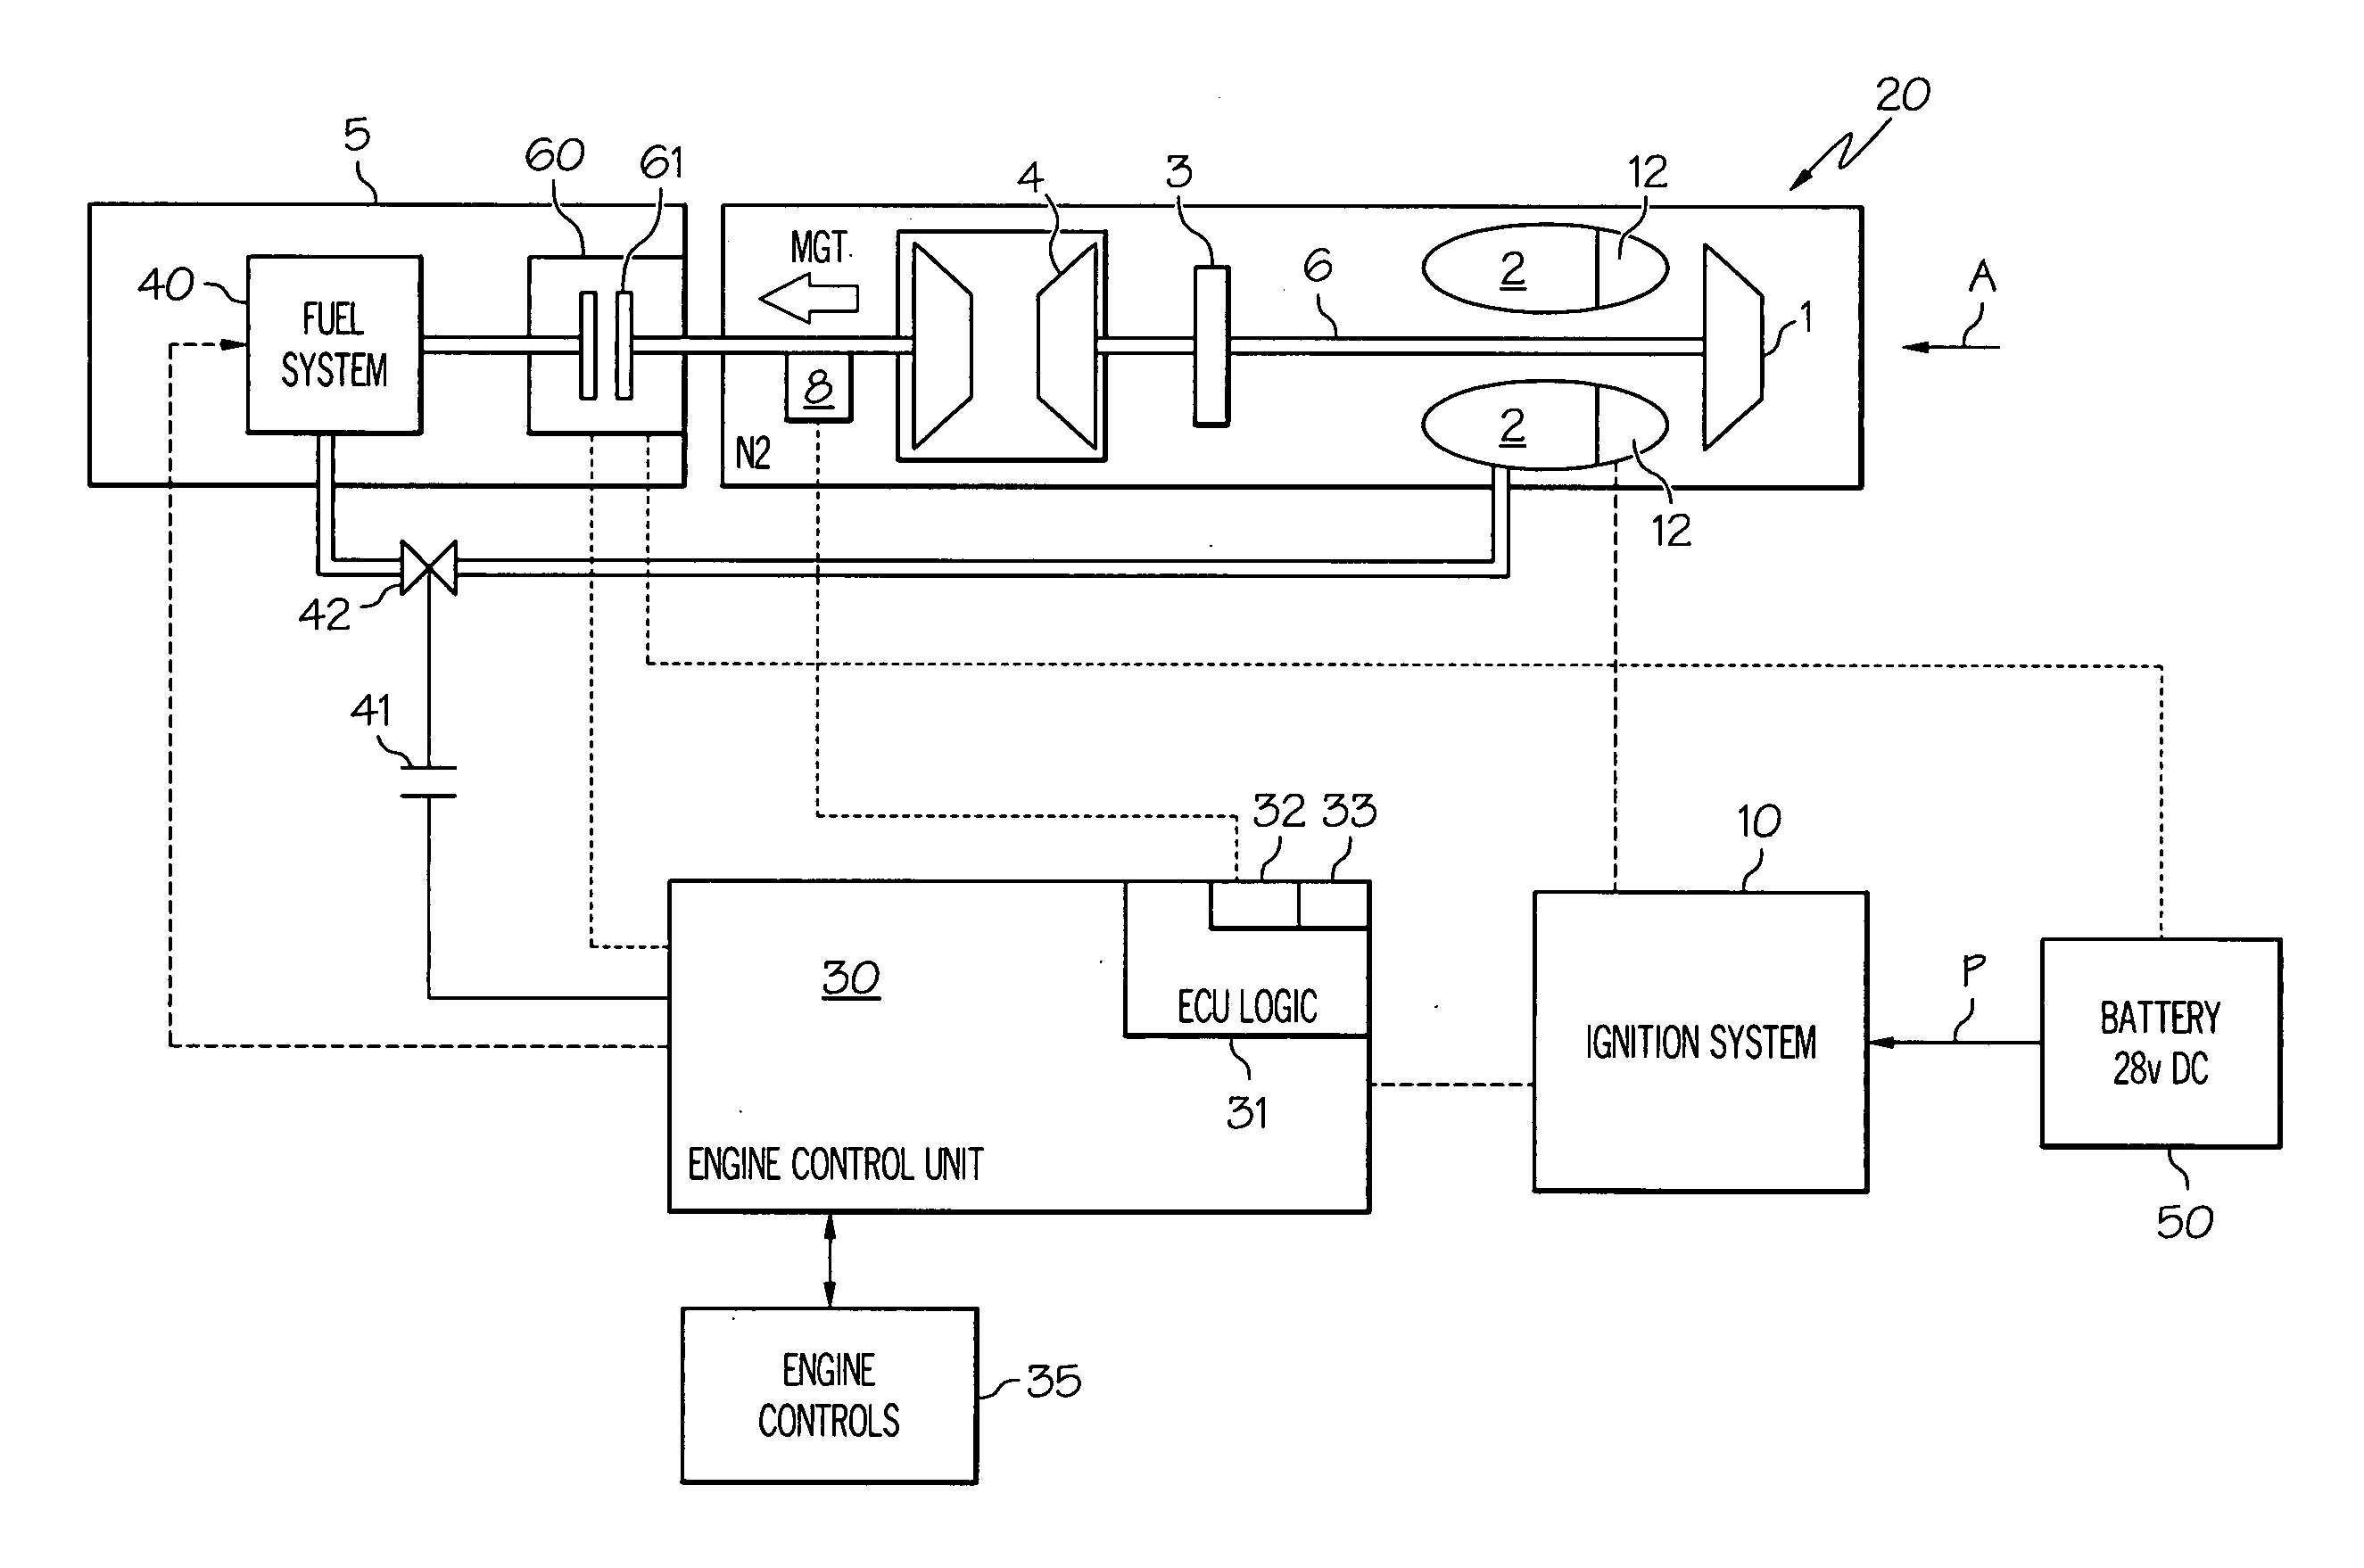 Methods and systems for turbine line replaceable unit fault detection and isolation during engine startup